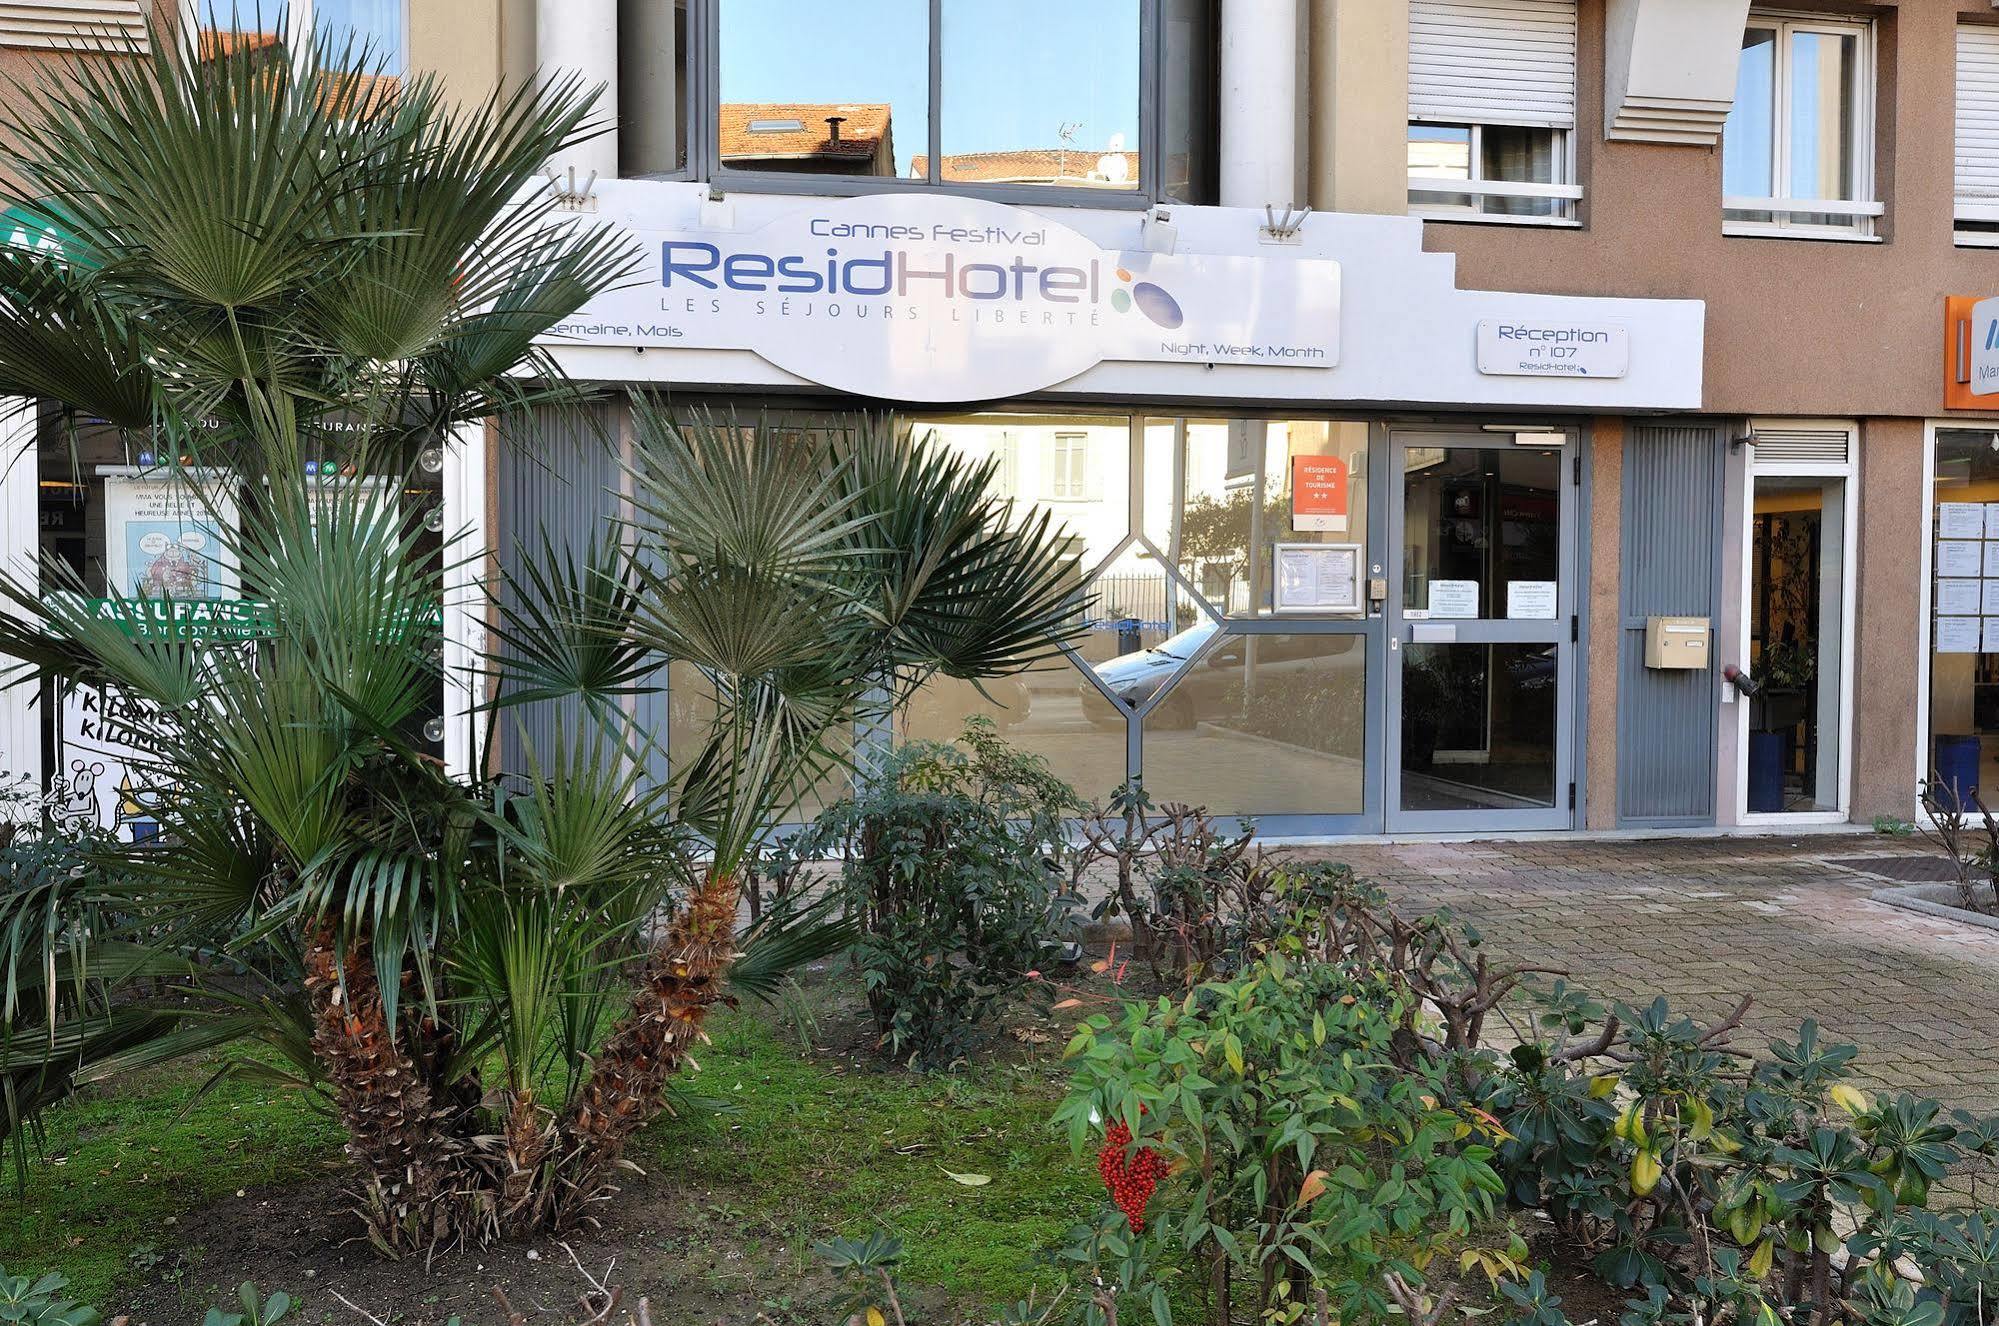 Residhotel Cannes Festival Exterior photo